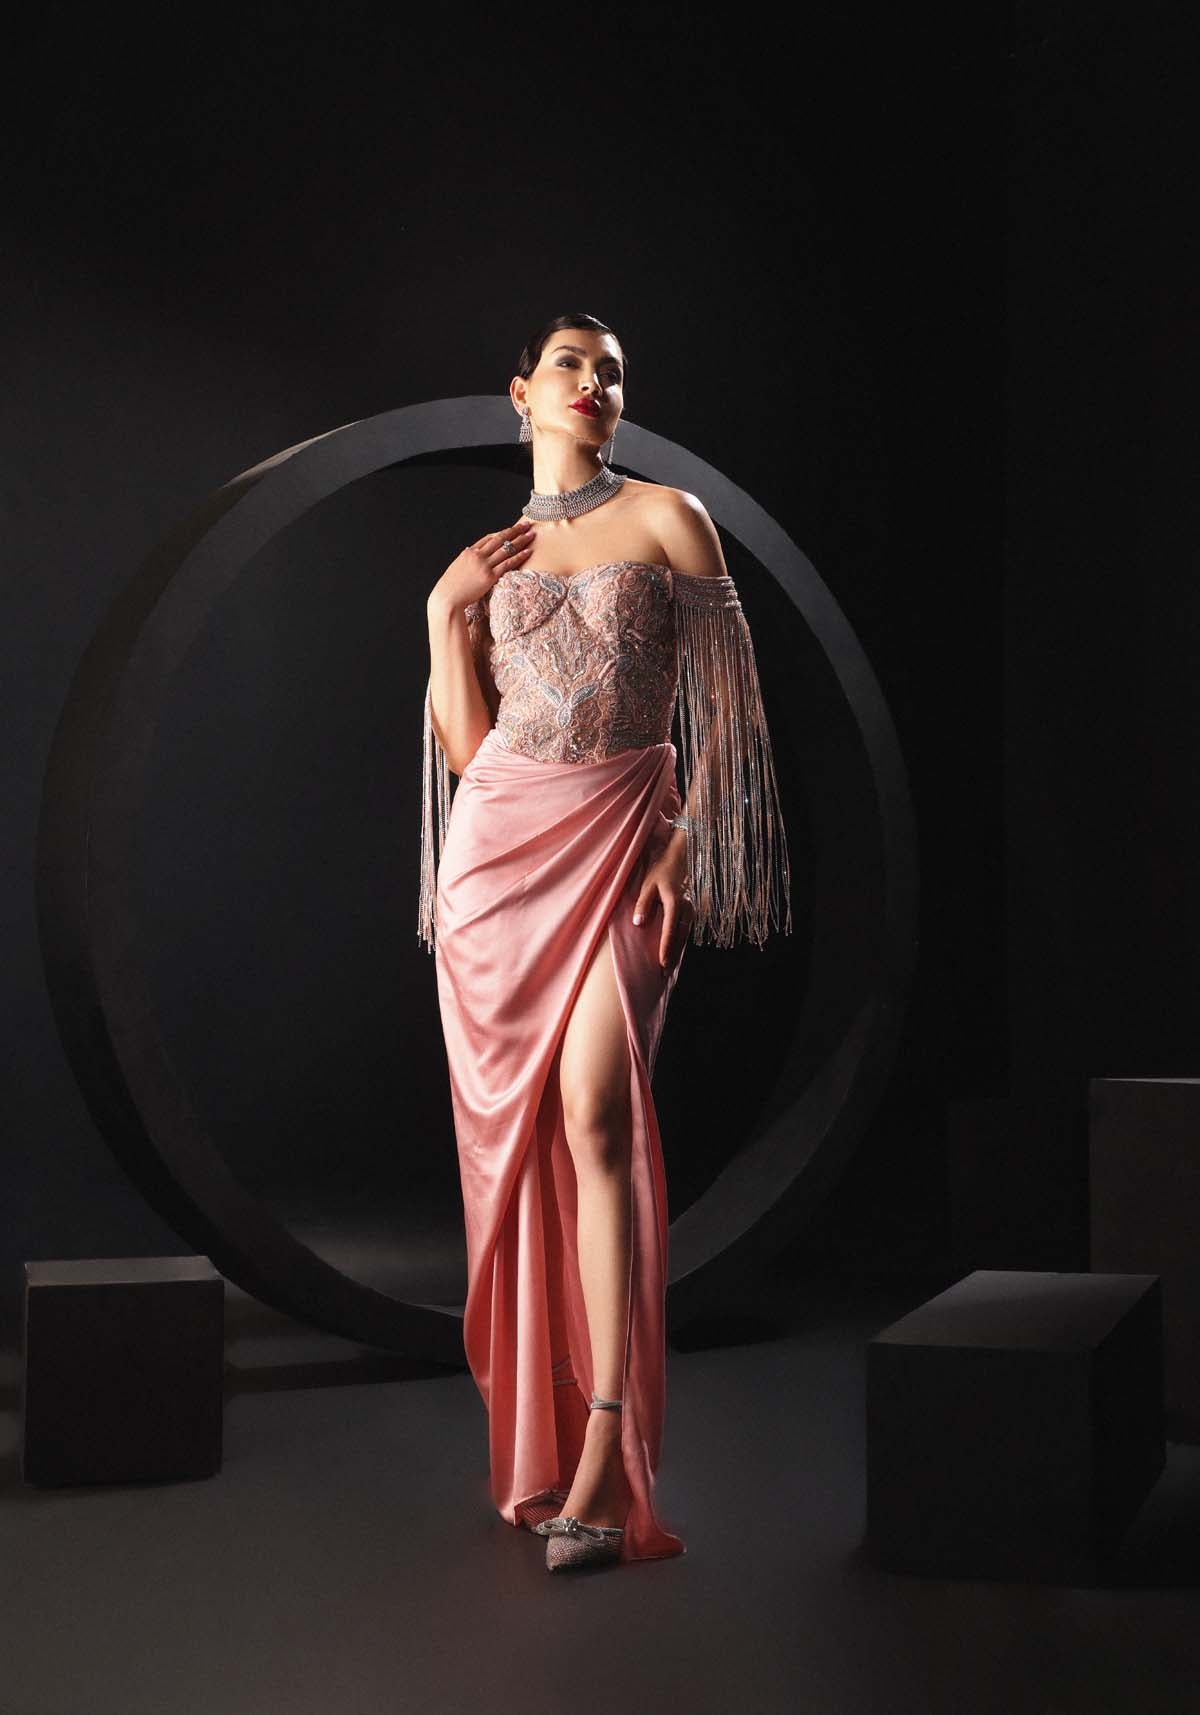 Exquisite Satin Gown with Hand-Embroidery & Tassels